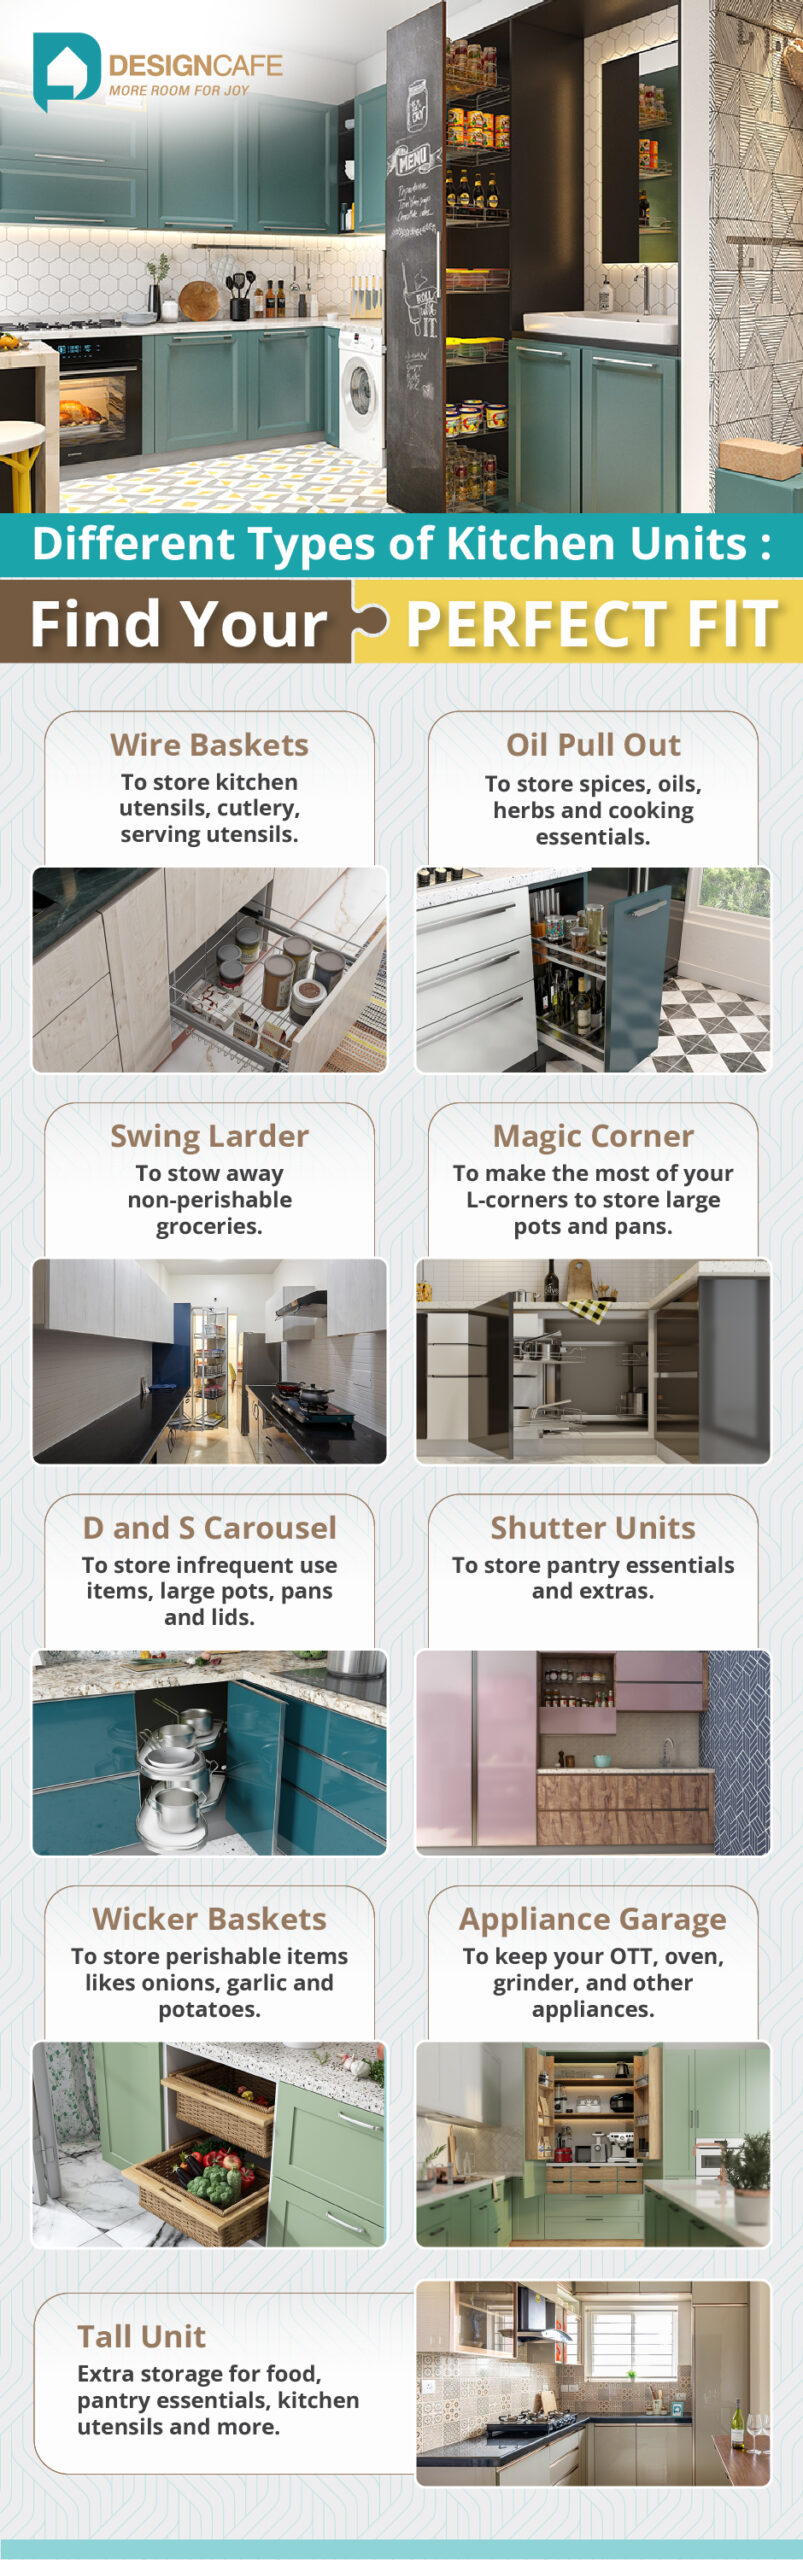 different types of kitchen units